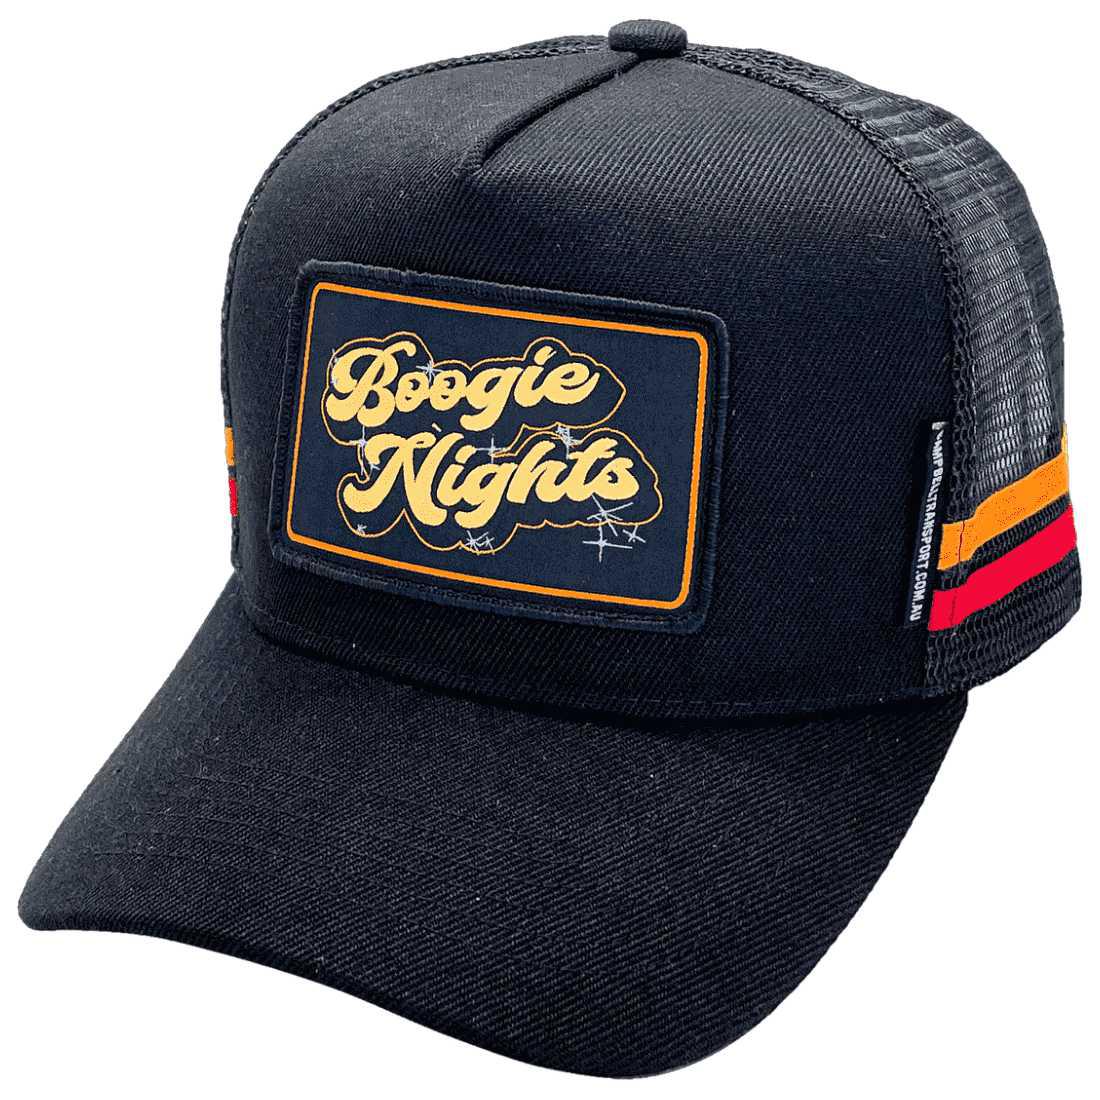 D.A. Campbell Transport Bathurst NSW Boogie Nights - Original Basic Aussie Trucker Hats with double side bands sewn on woven badge